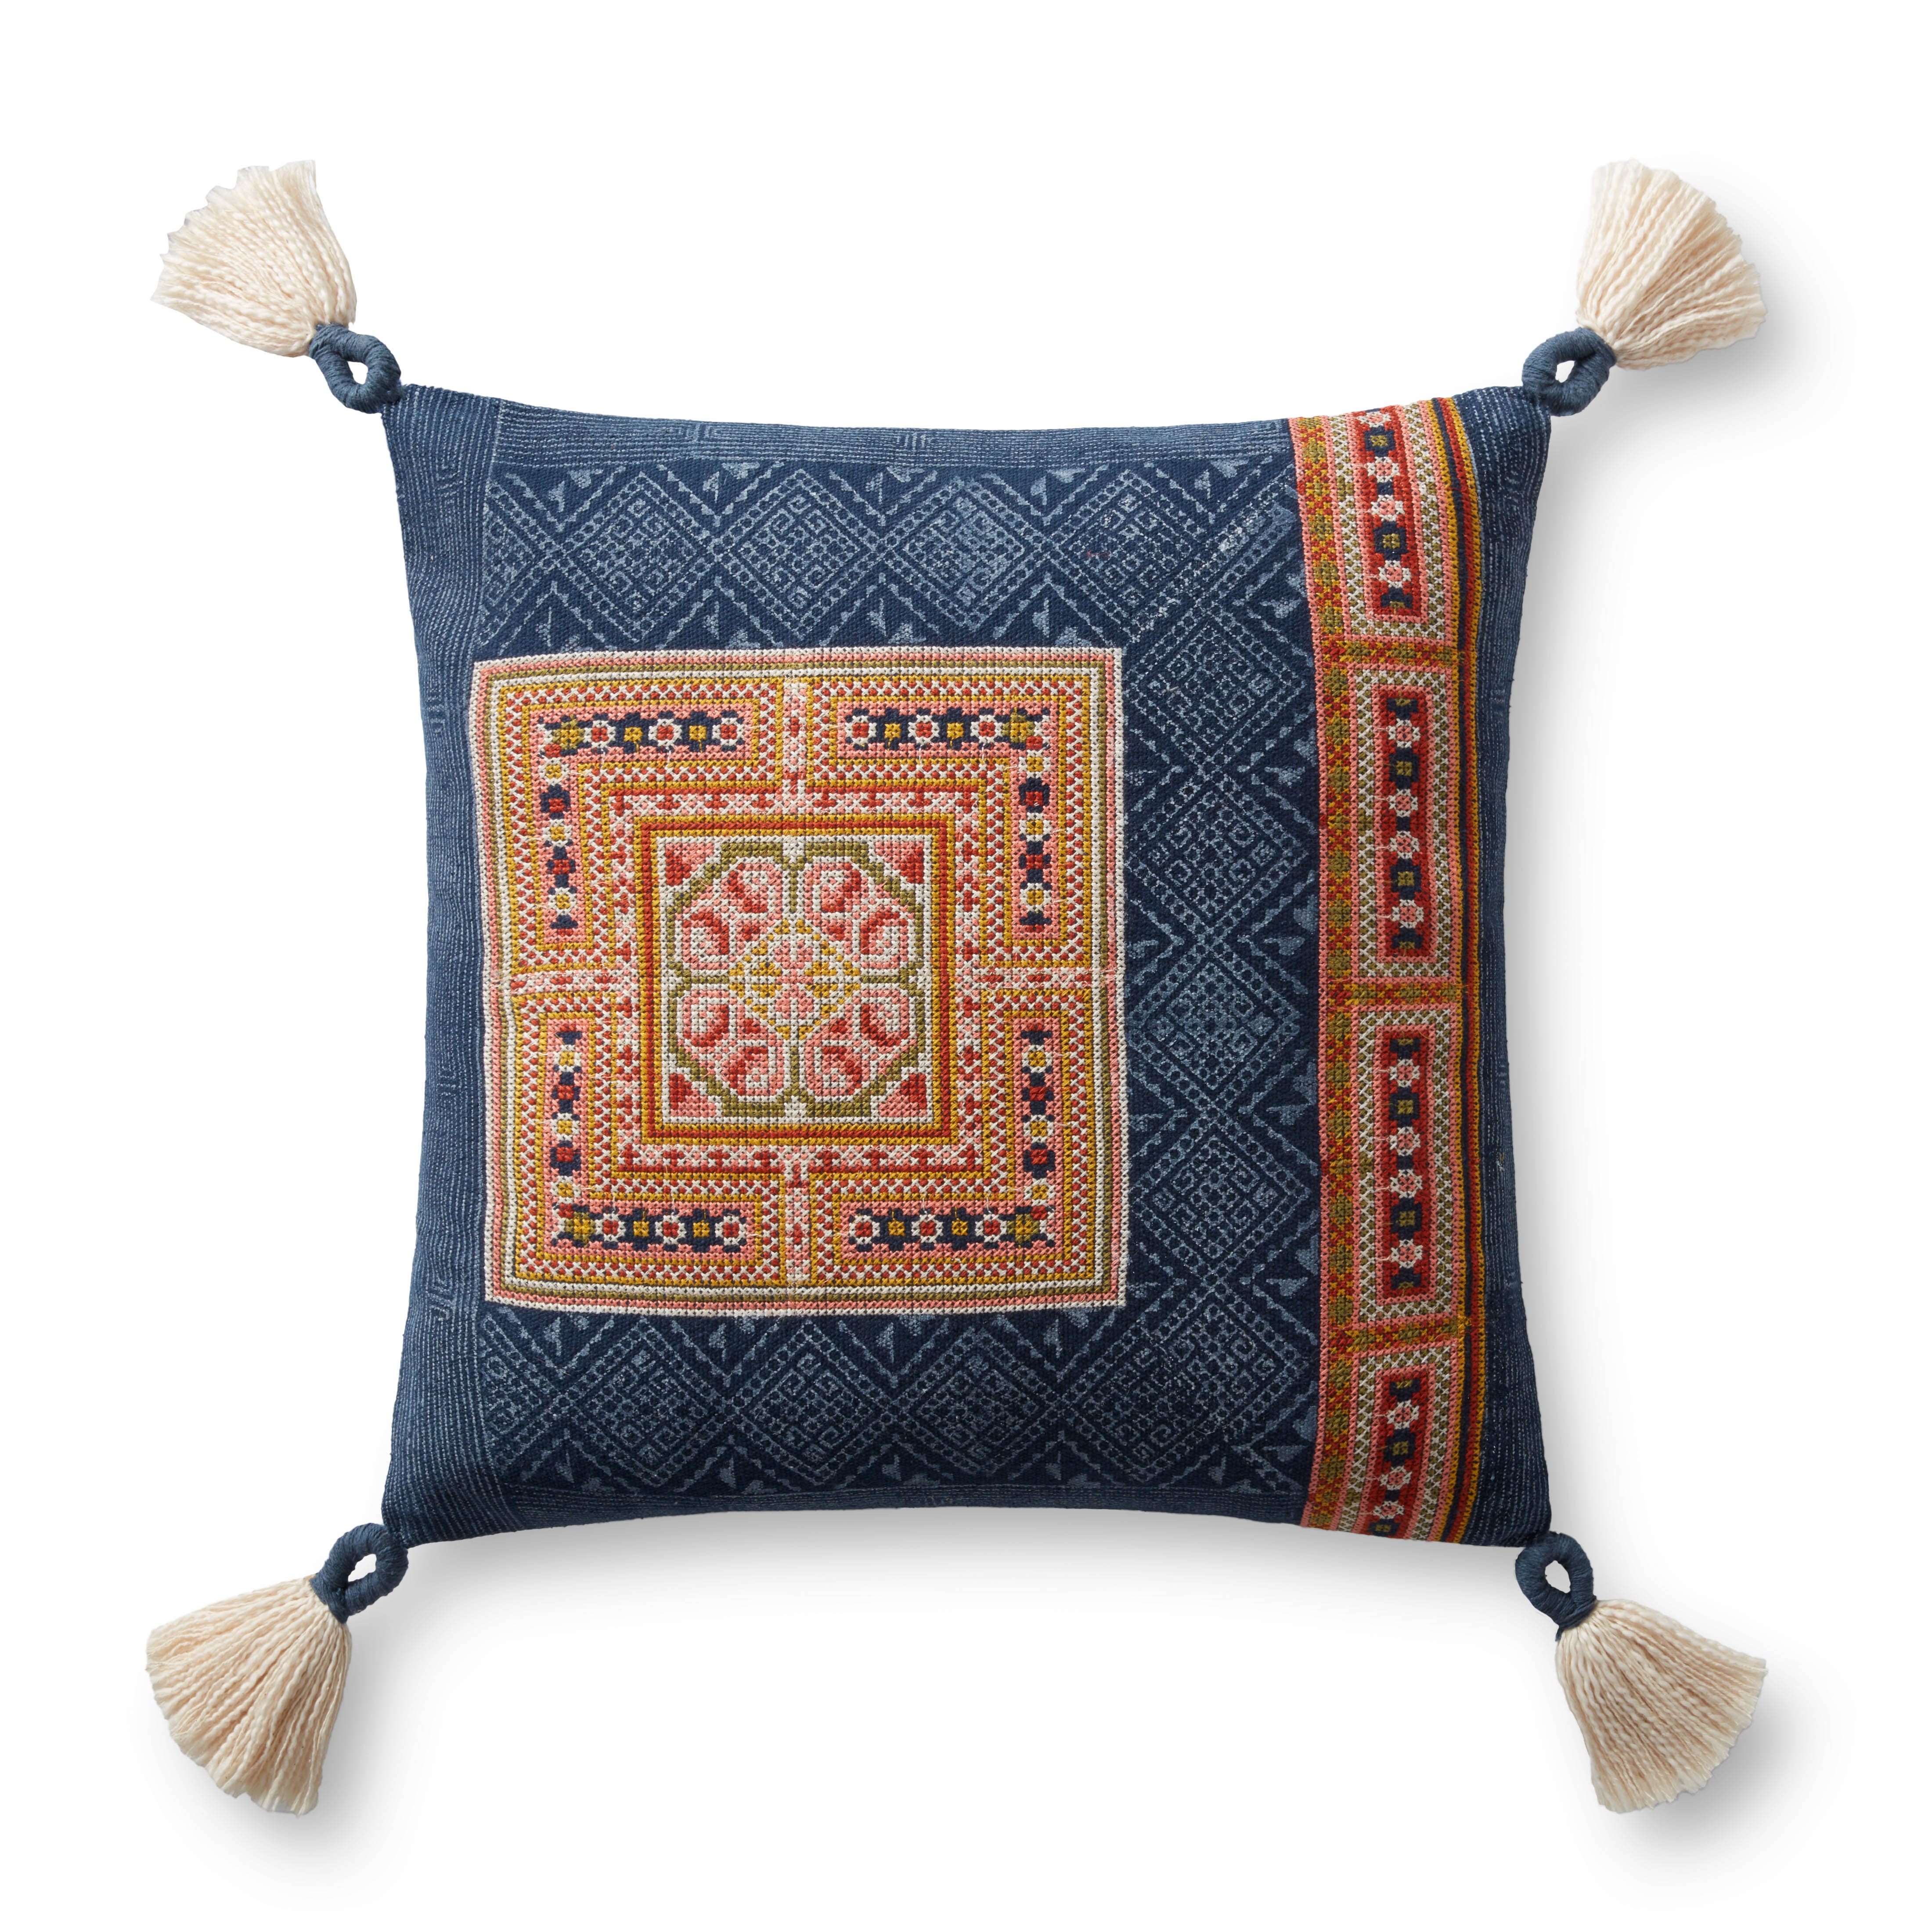 PILLOWS P0968 NAVY / MULTI 18" x 18" Cover w/Down - Image 0